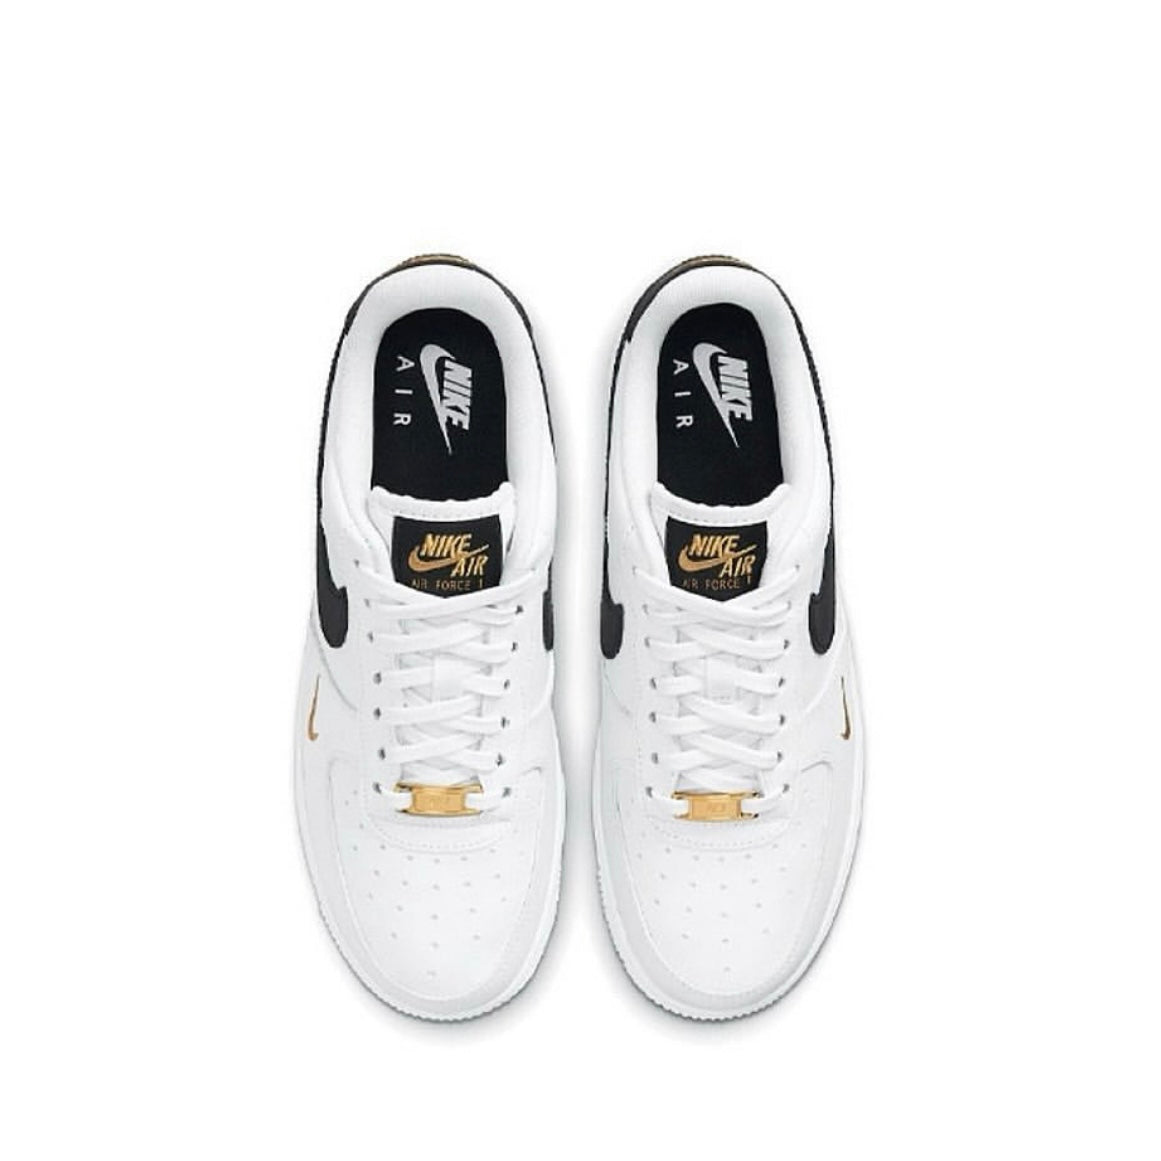 Nike Air Force 1 Low Essential "White/Black/Gold" sneakers